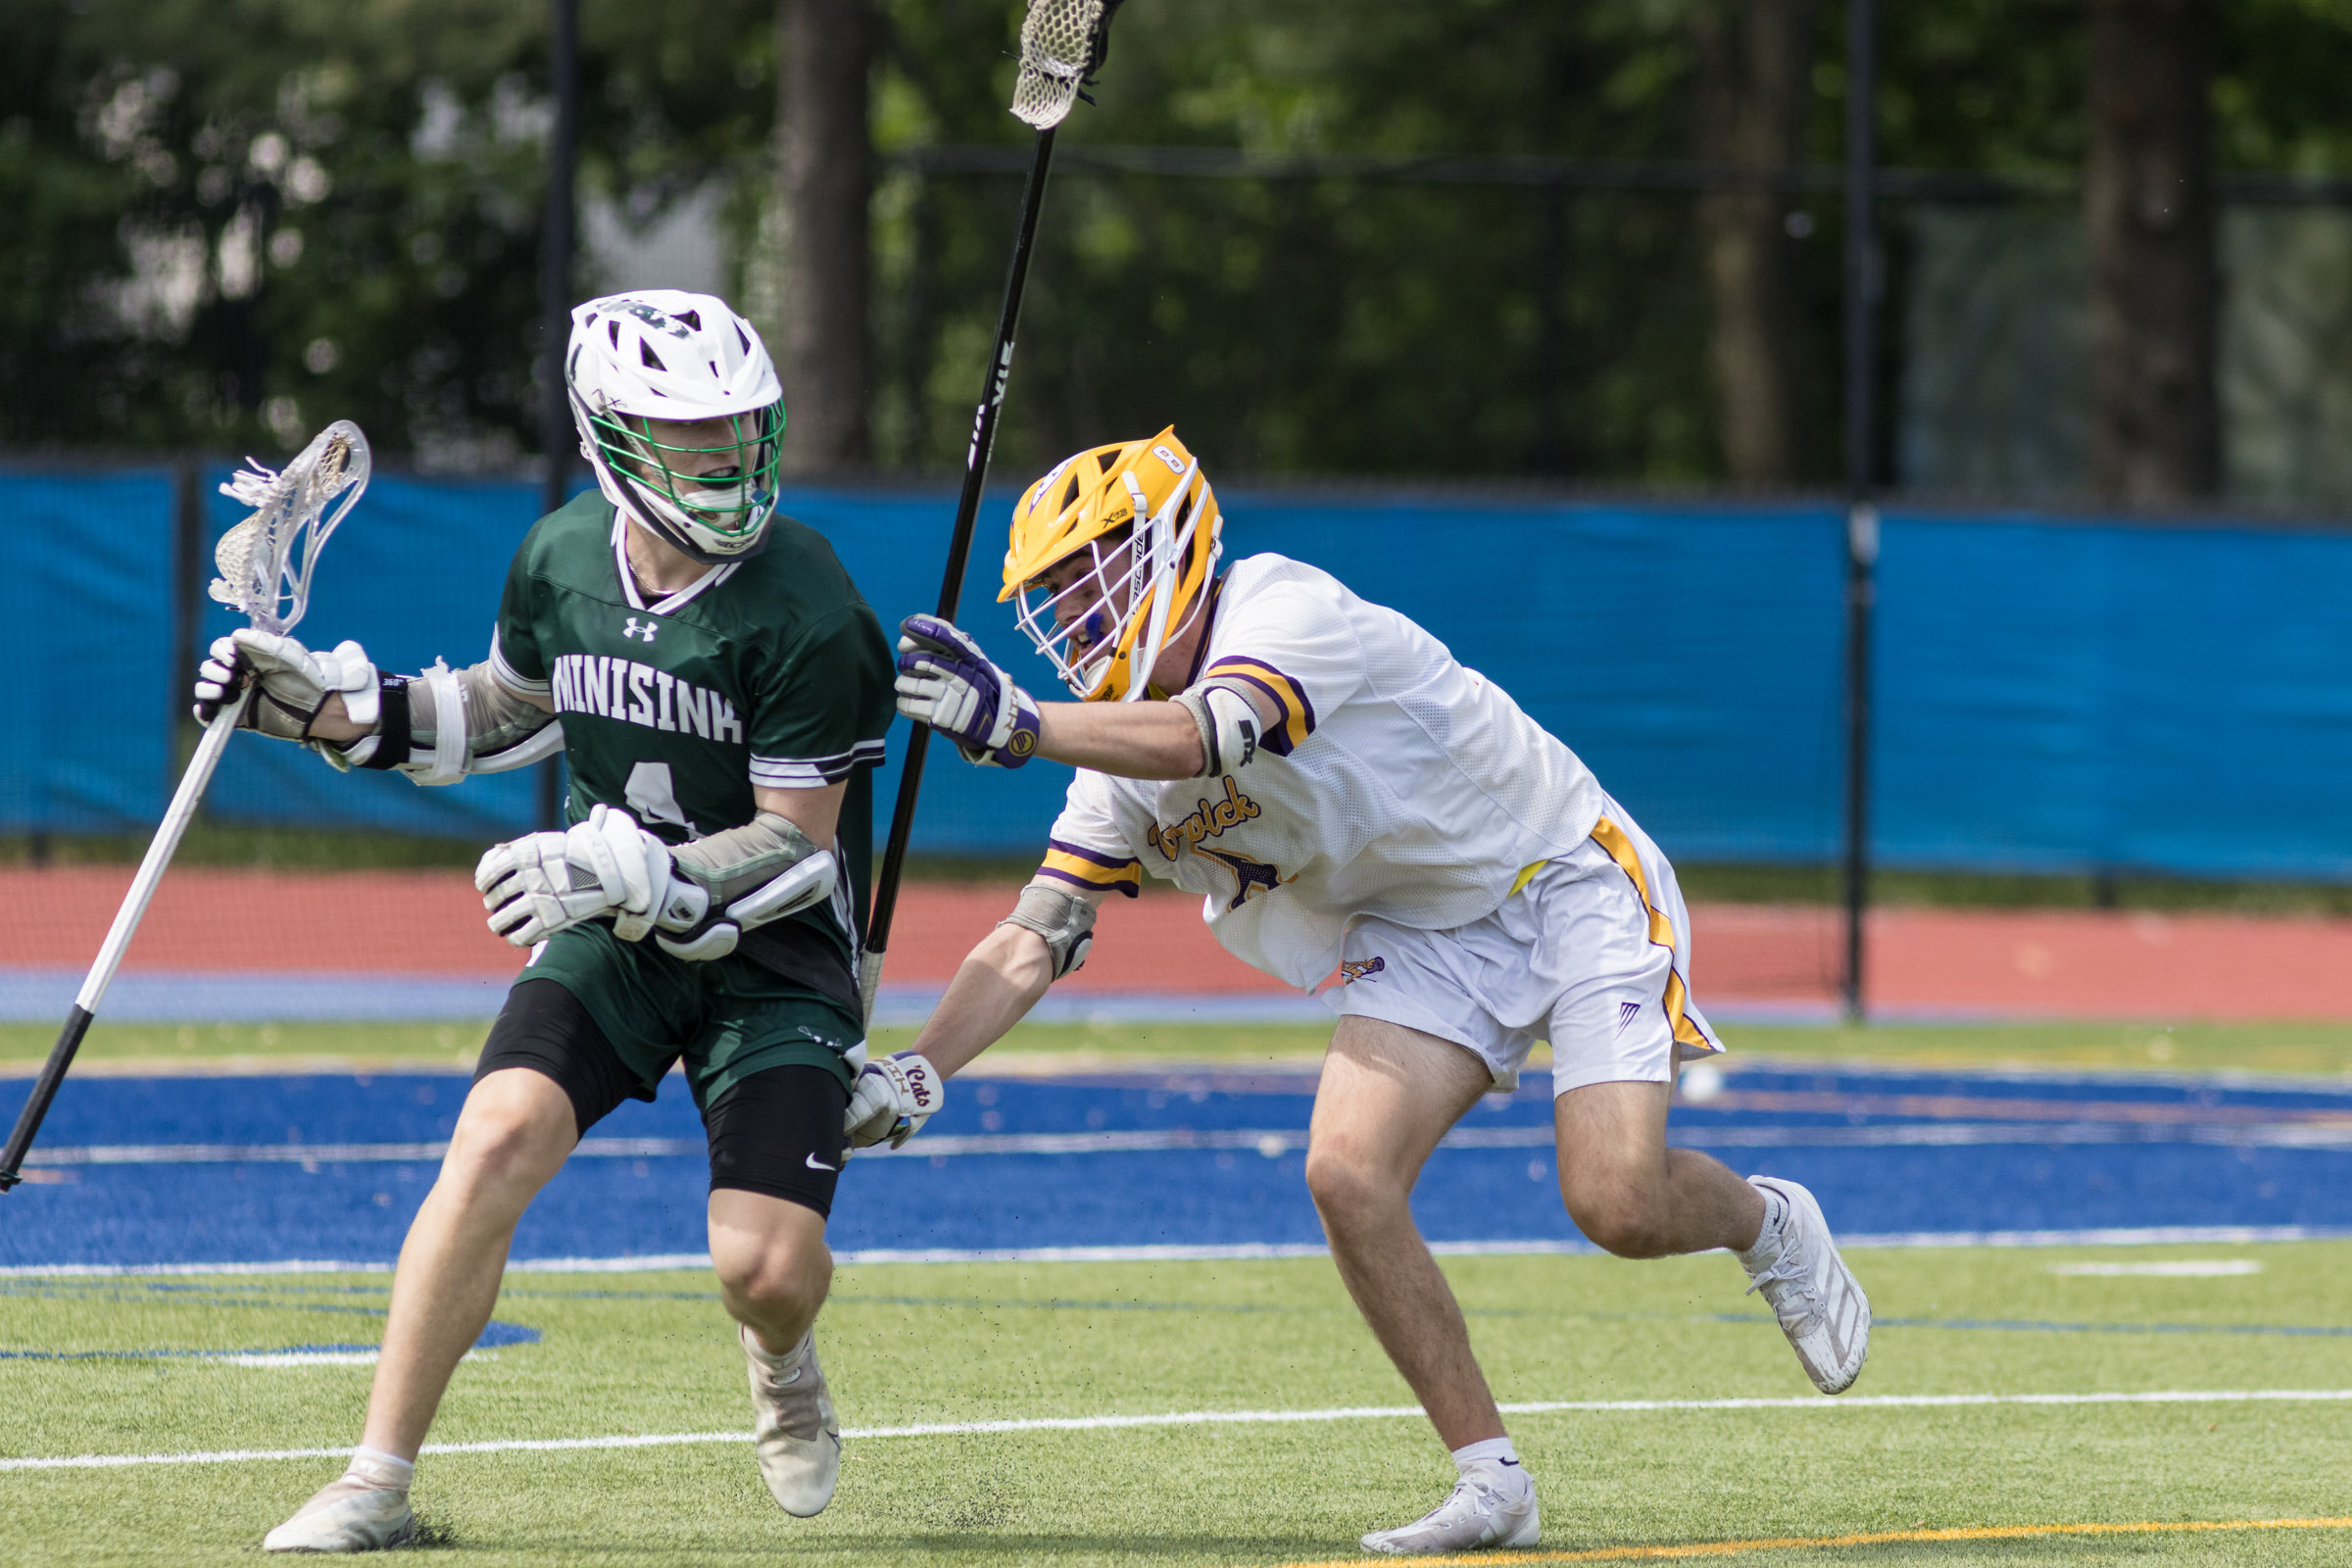 A Warwick Valley varsity boys lacrosse player defends a Minisink Valley player during the Section 9 Class B championship game.